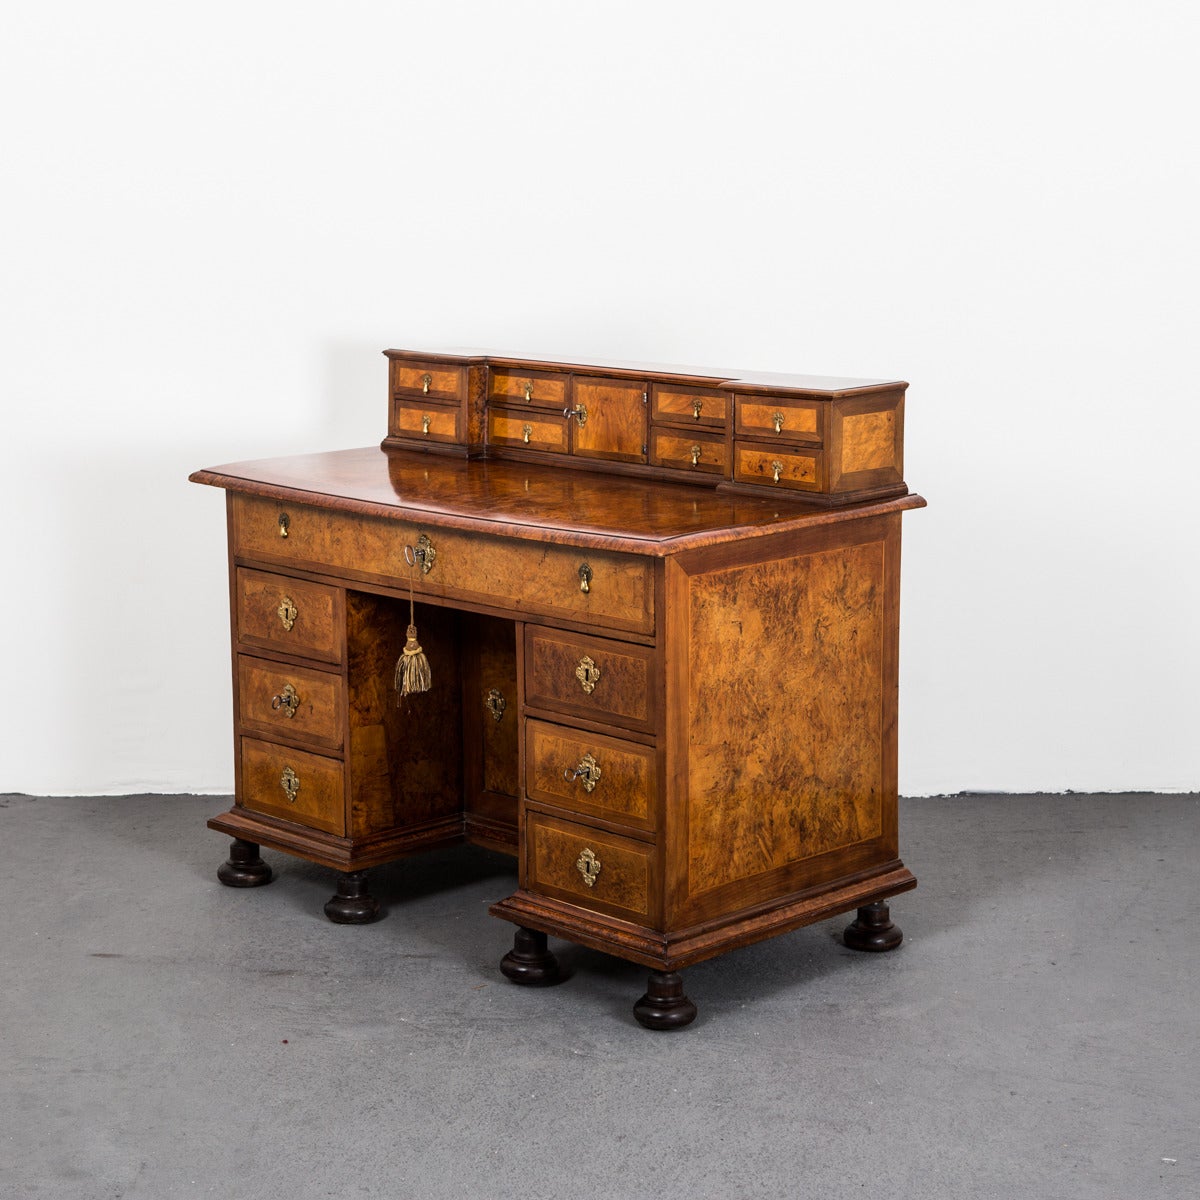 Desk Swedish Baroque Period Sweden. A rare Swedish Baroque desk in a stunning condition and patina from the Swedish King Fredrik I period. Structure in oak with alder root and walnut veneer. Standing on with blackened ball feet. Several drawers with